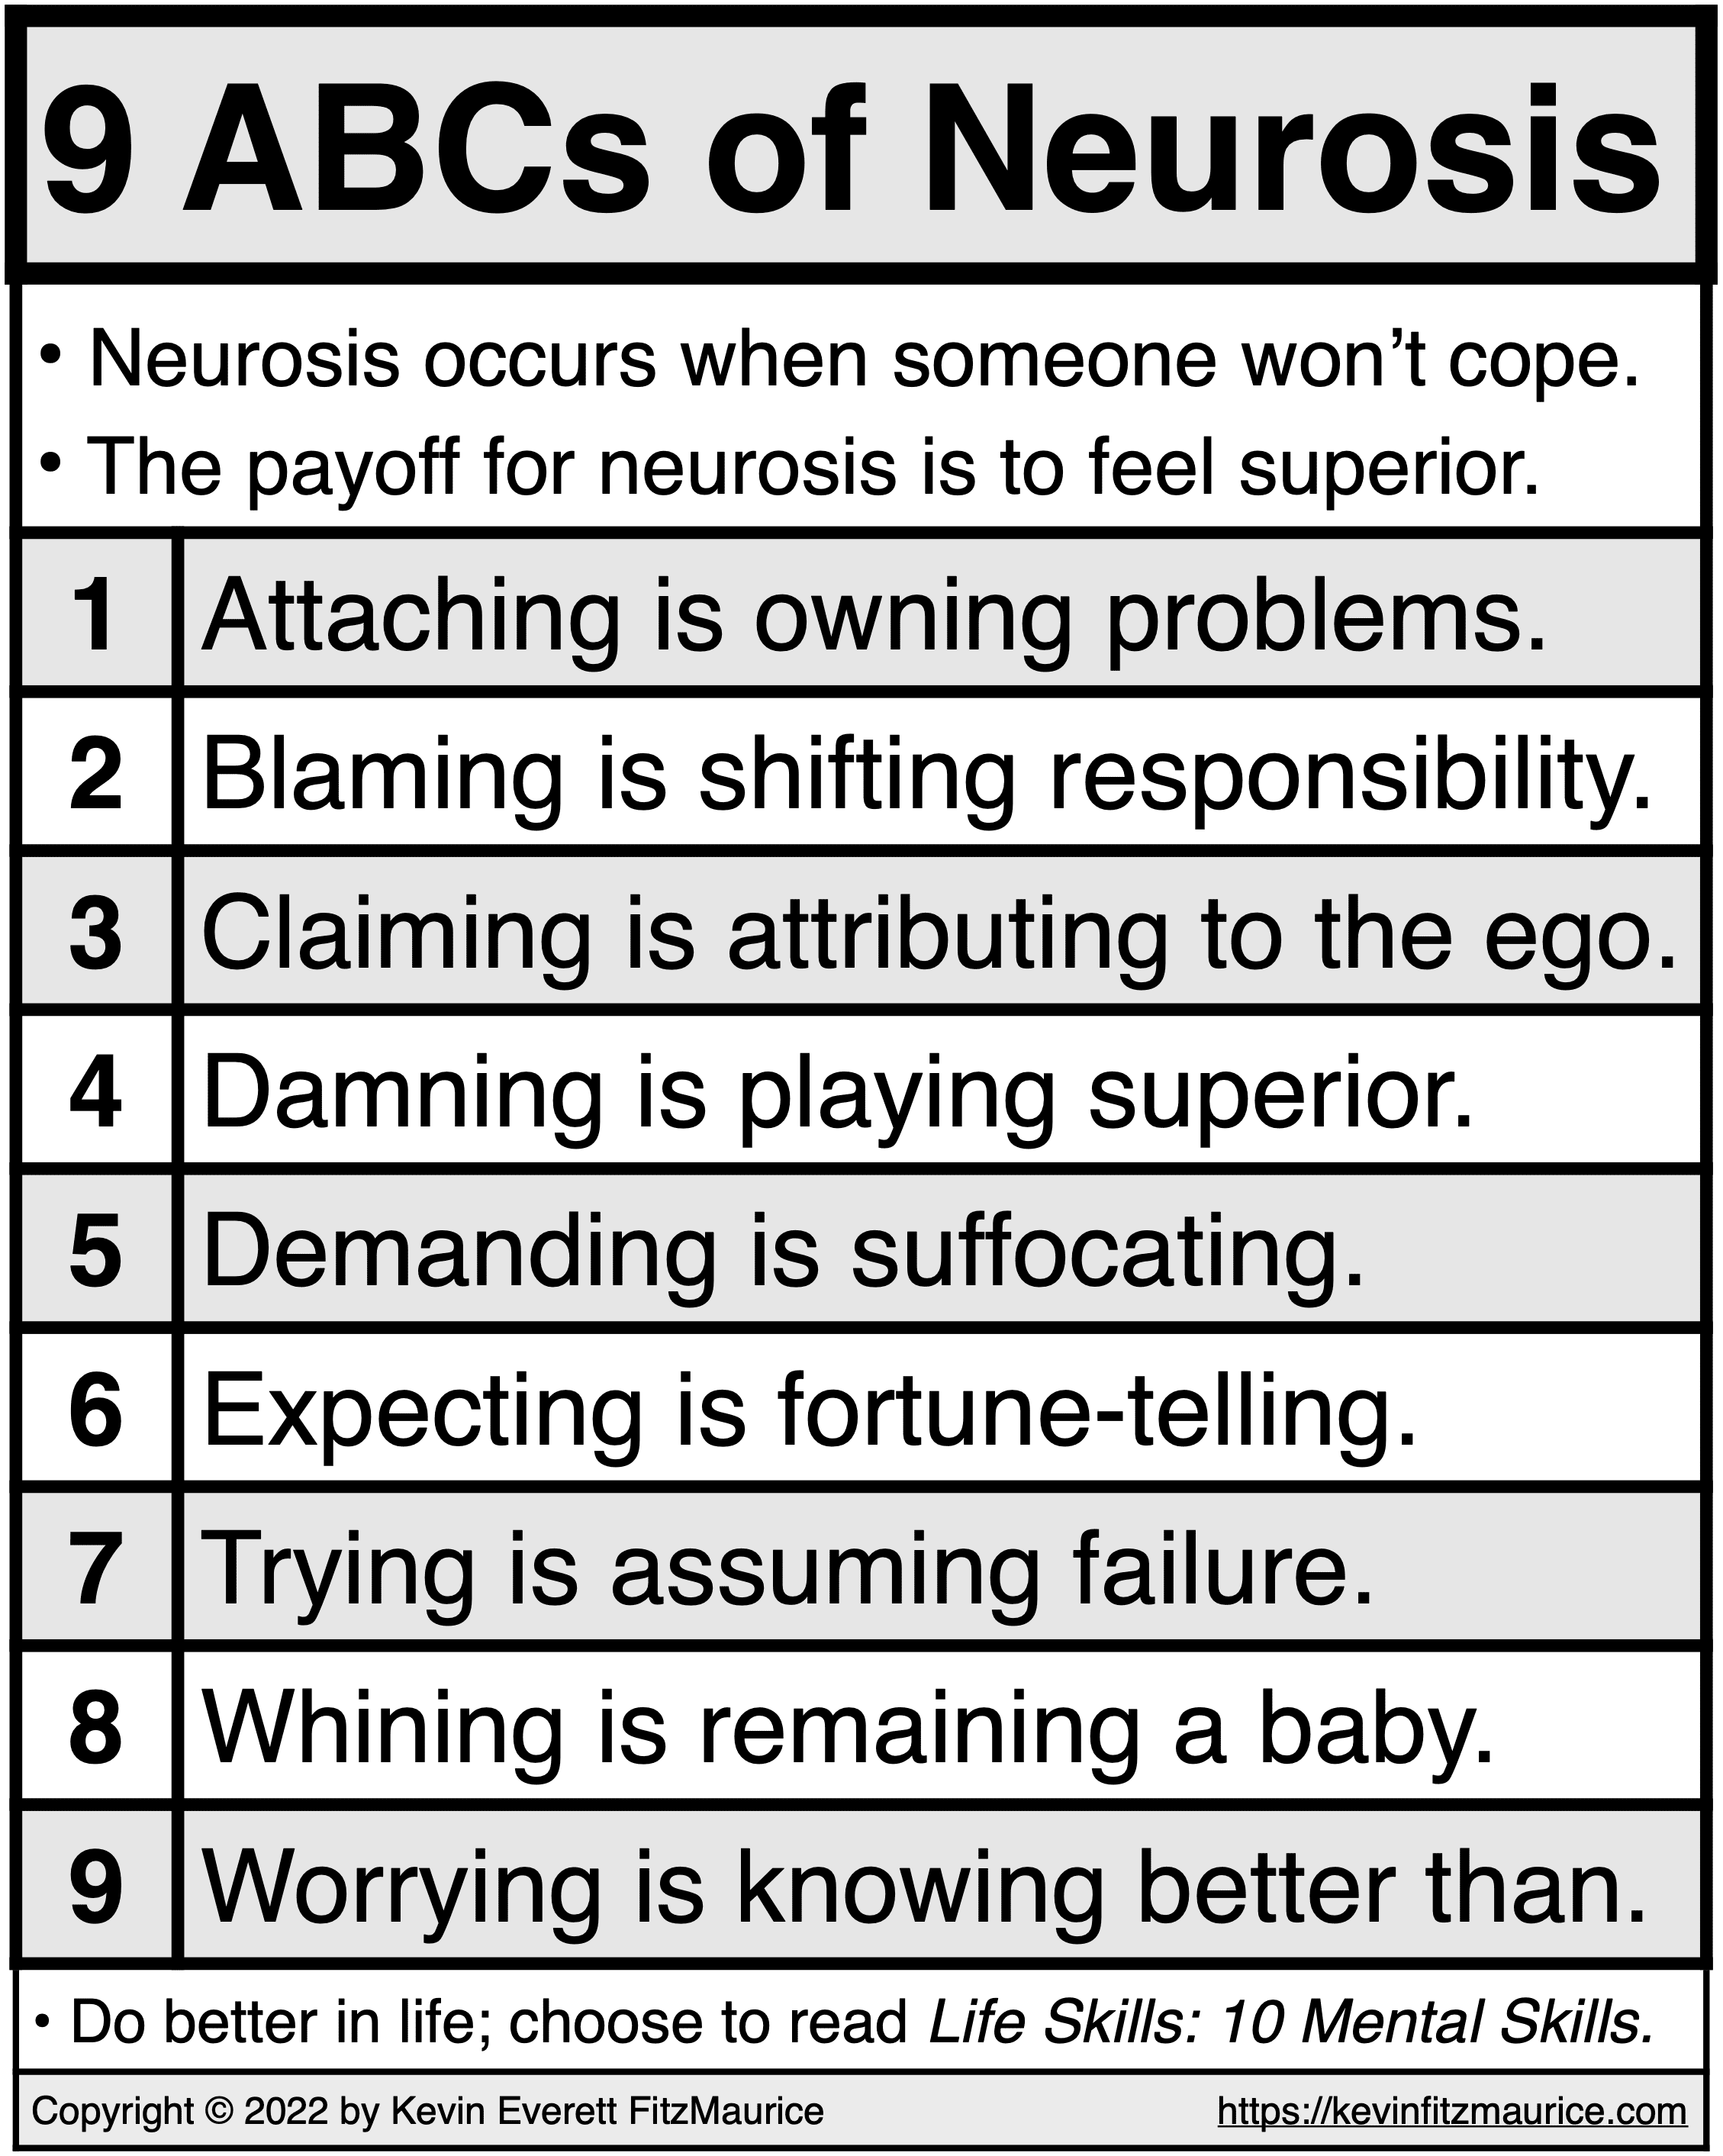 9 Ways to Stay Neurotic